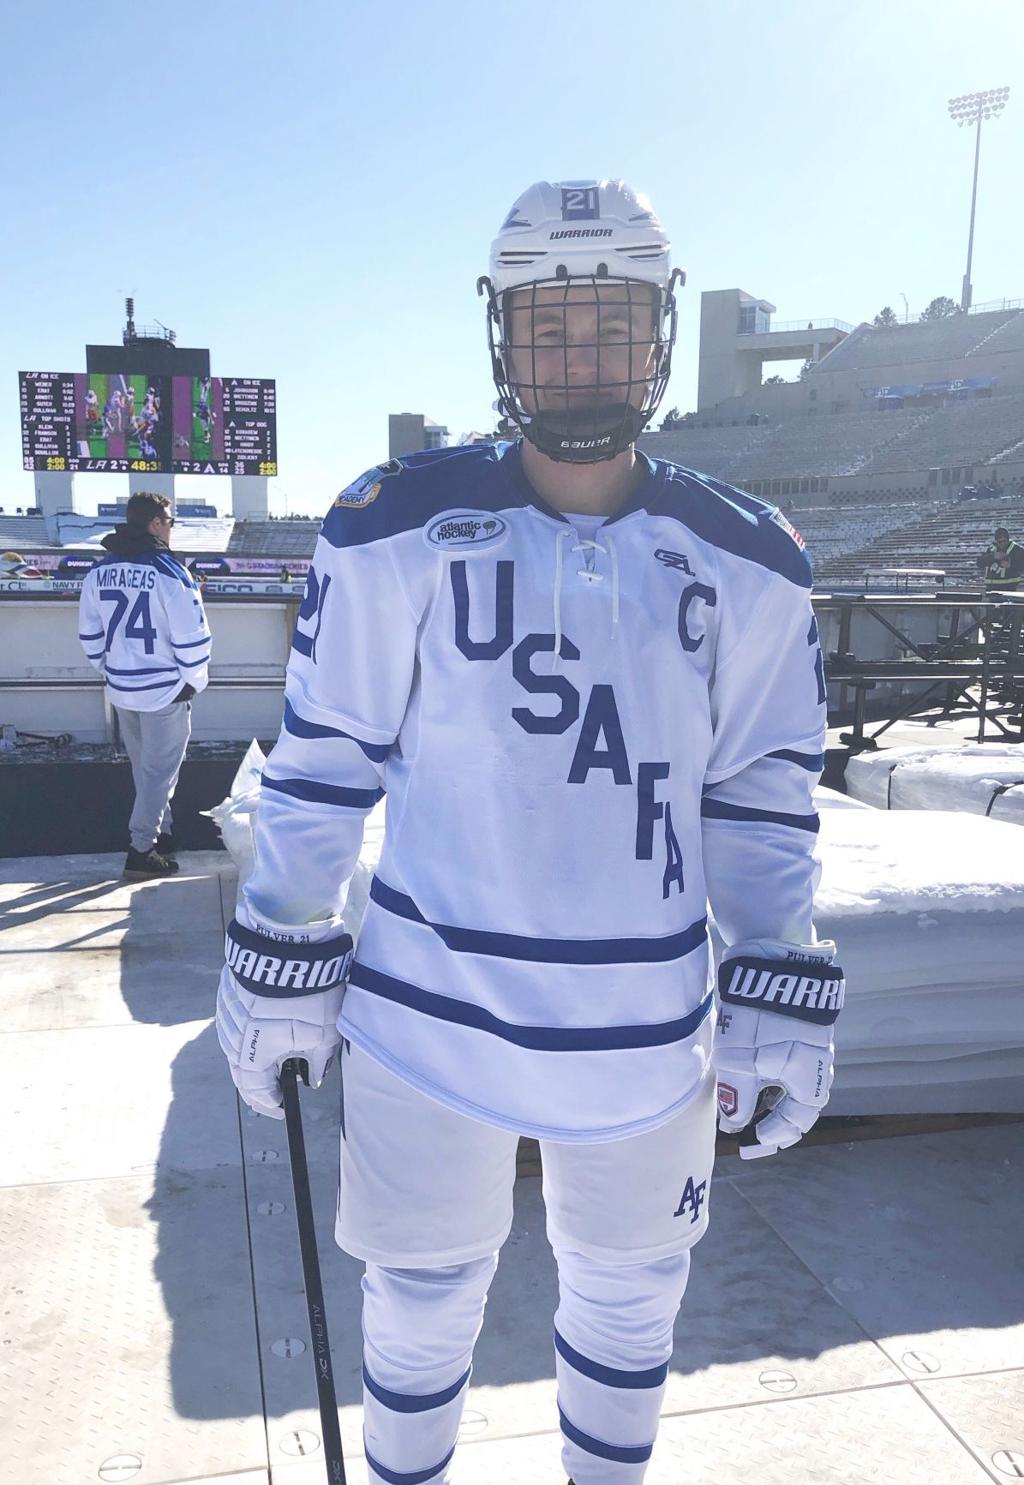 Air Force Falcons Team-Issued #18 White Jersey from the Hockey Program